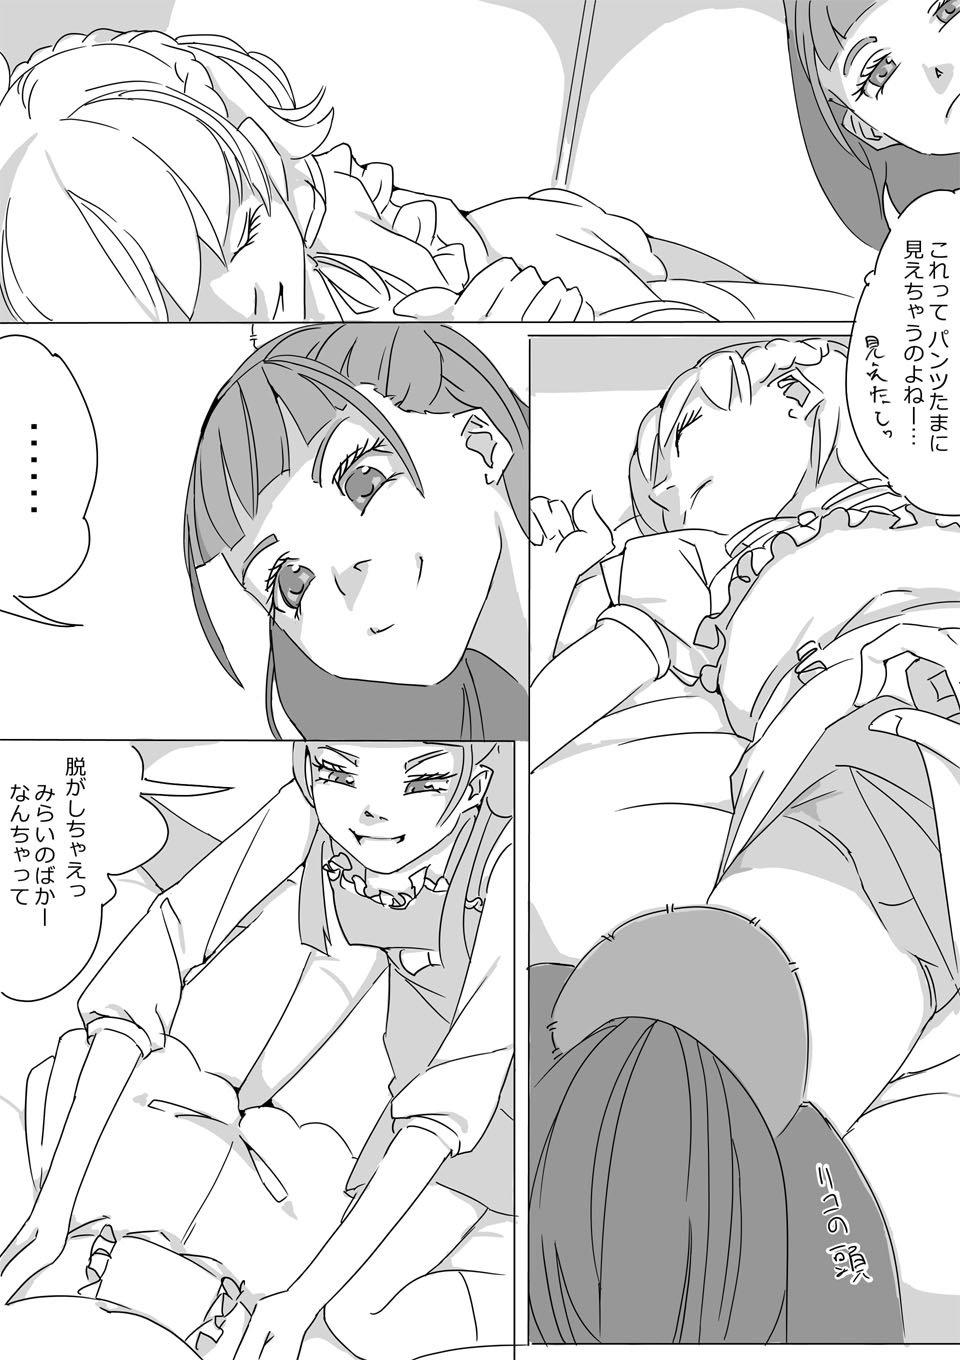 Squirt Untitled Precure Doujinshi - Maho girls precure Young - Page 3